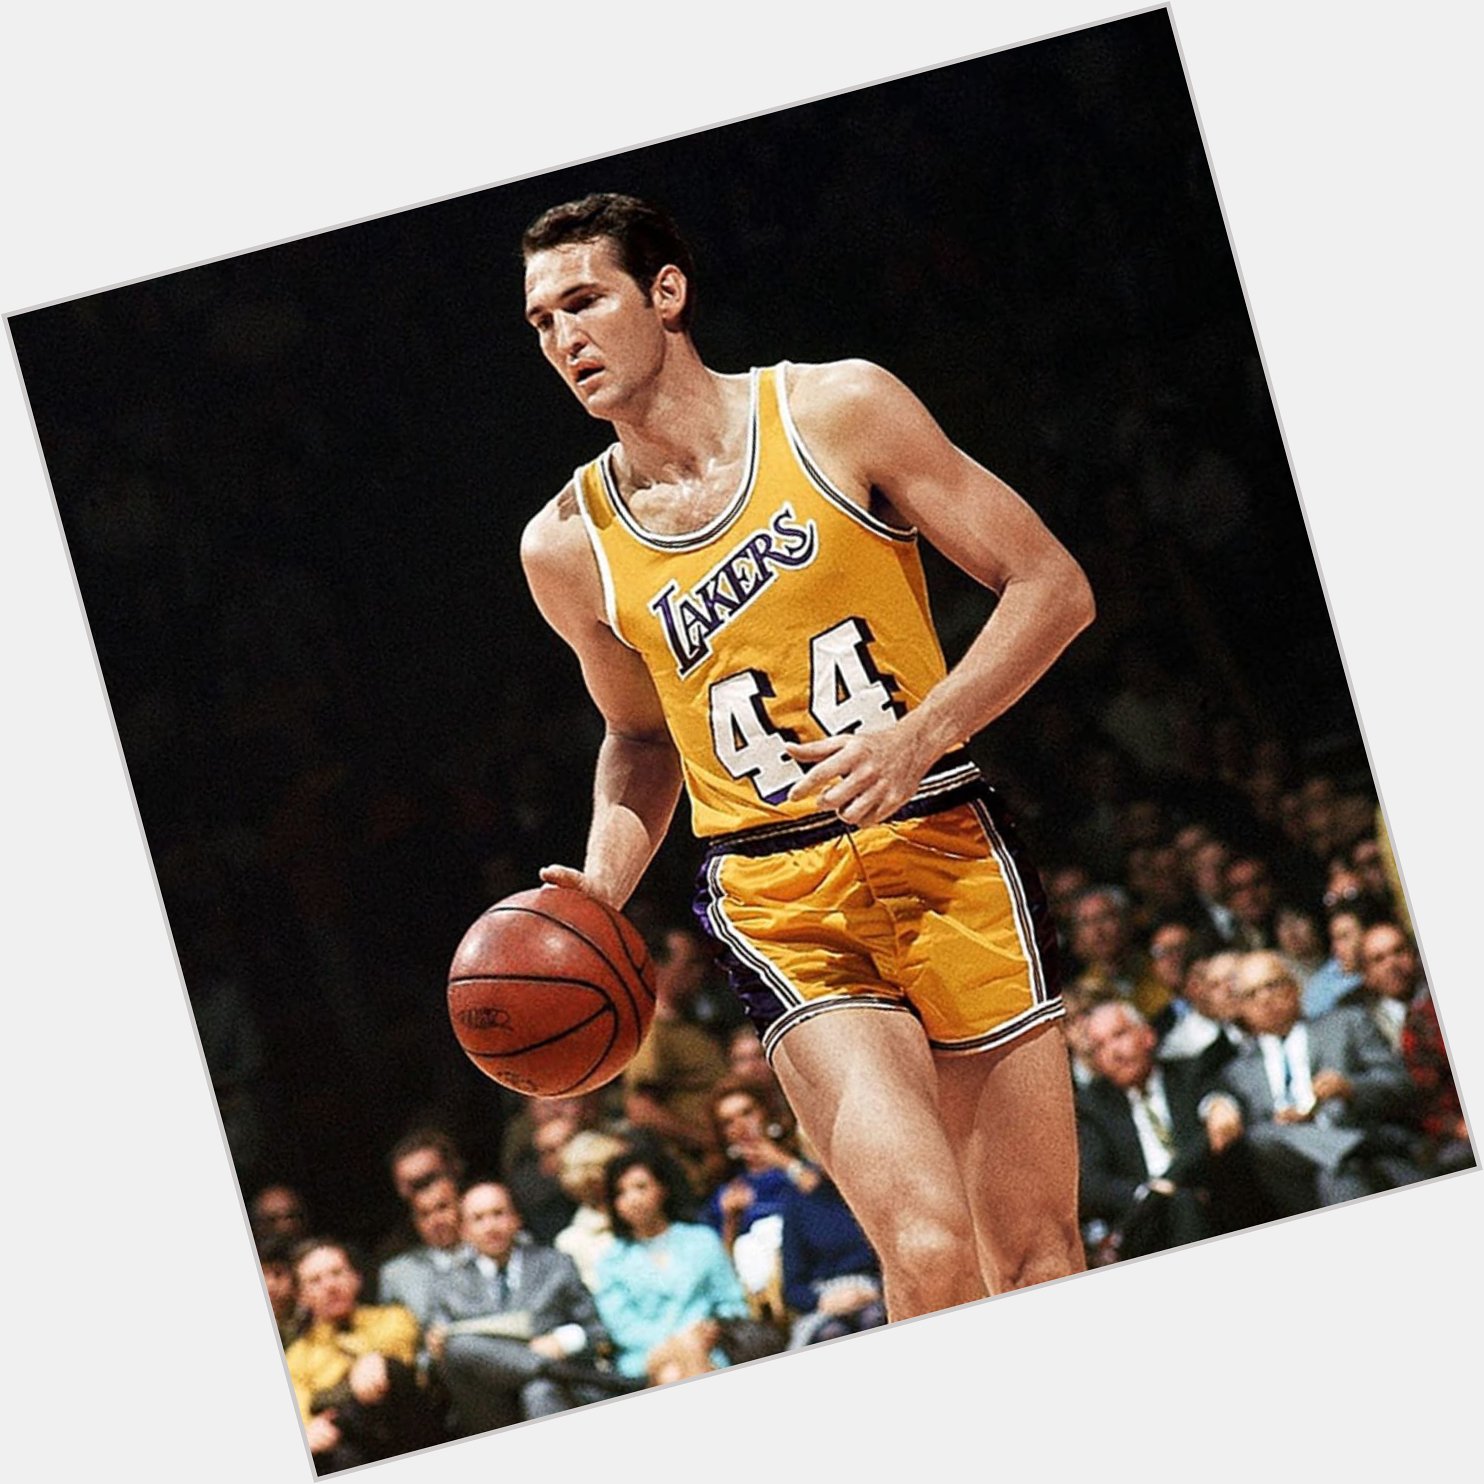 Happy 82nd birthday to the logo and legend, Jerry West!  